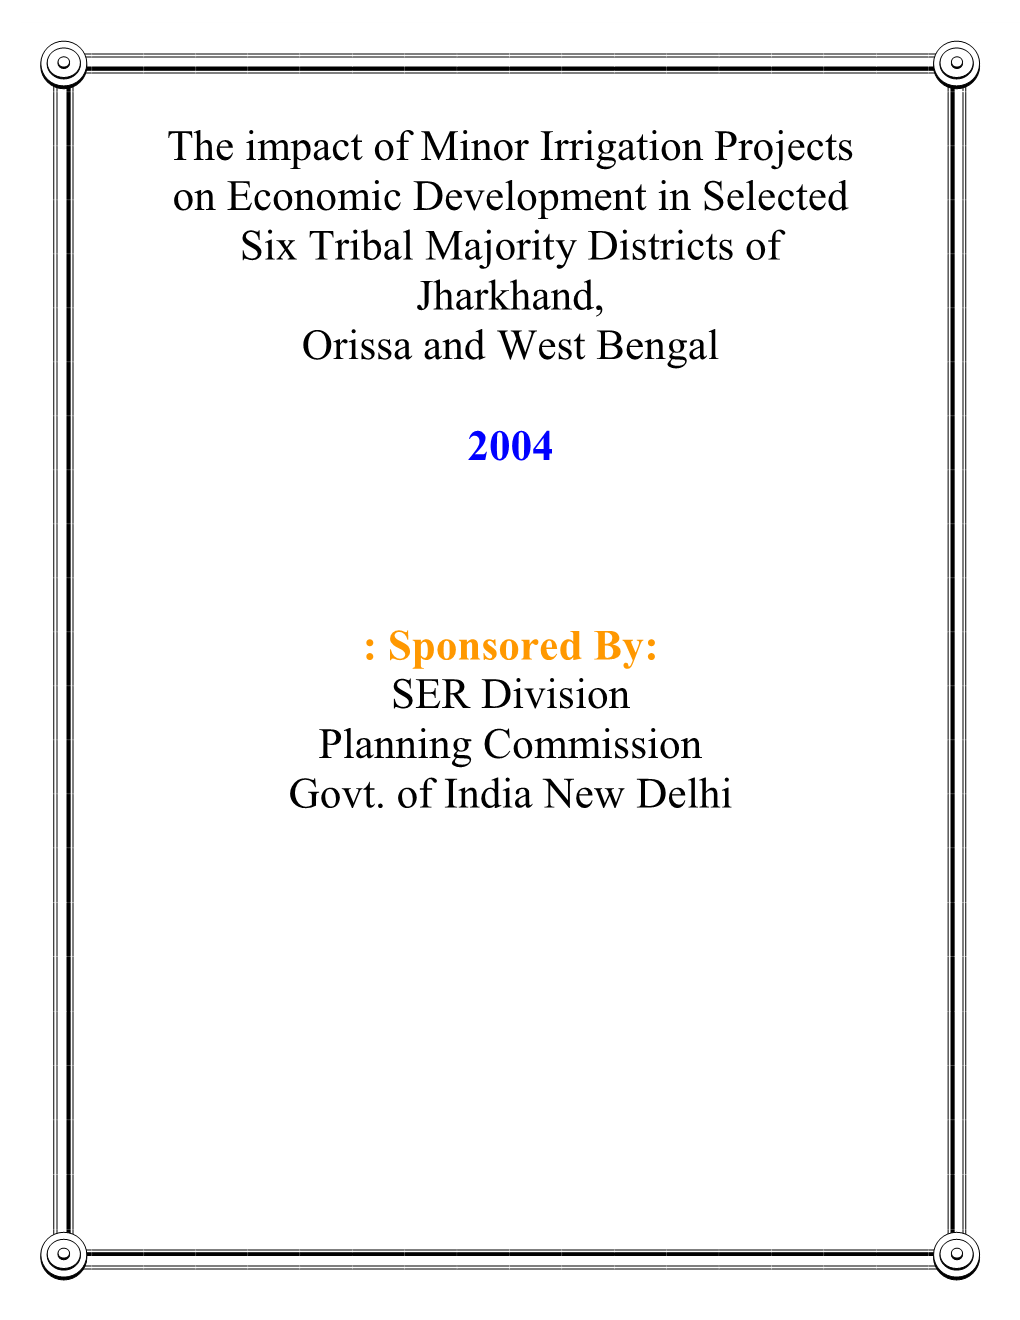 The Impact of Minor Irrigation Projects on Economic Development in Selected Six Tribal Majority Districts of Jharkhand, Orissa